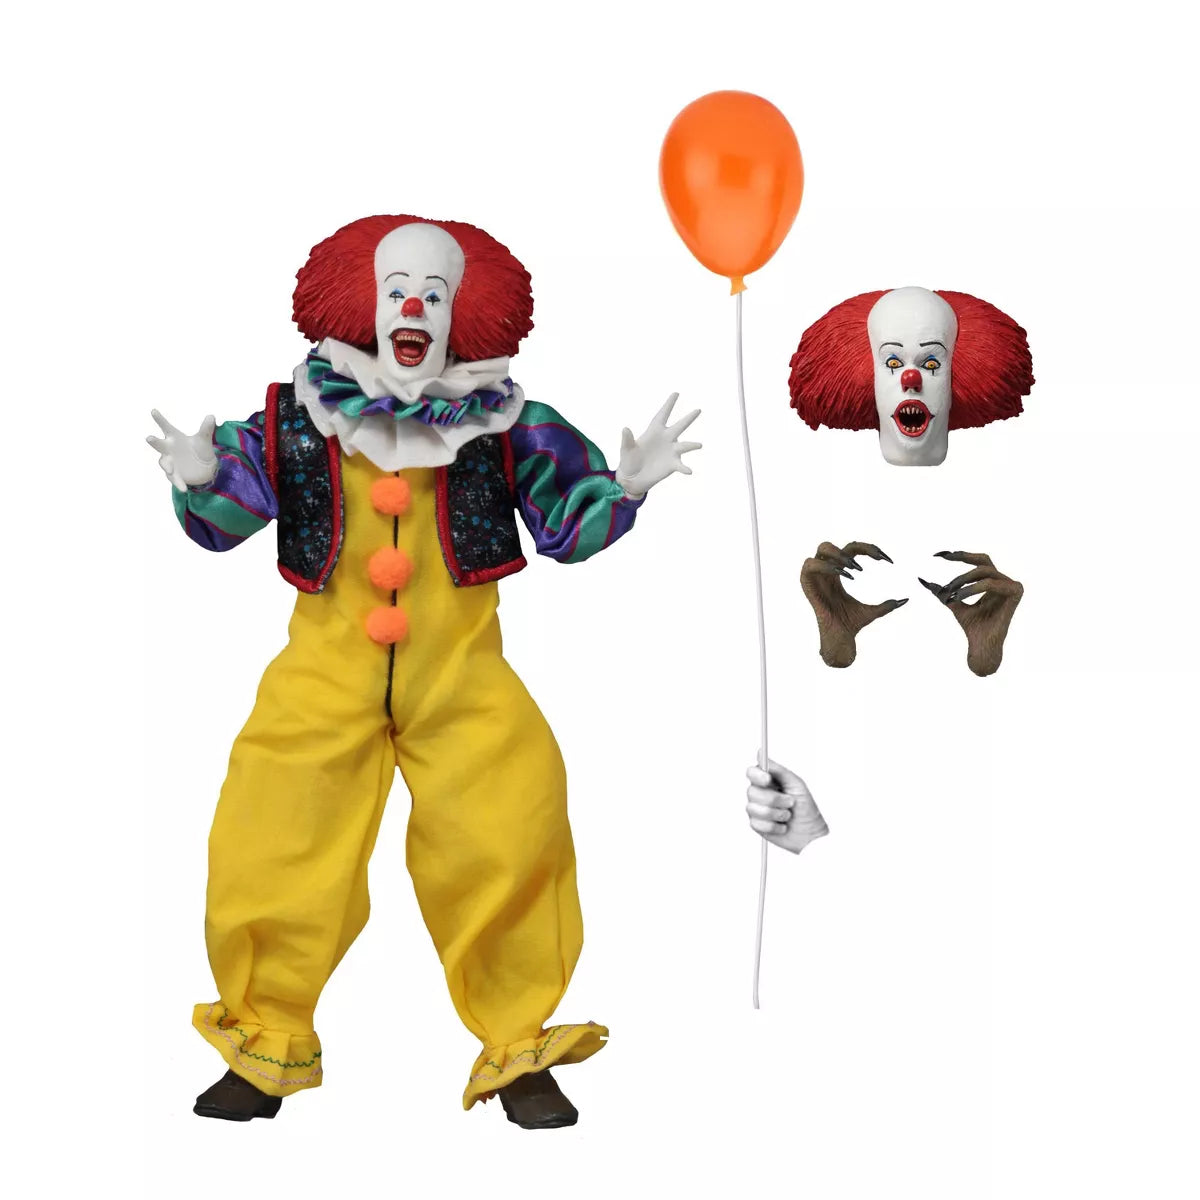 NECA It The Movie Pennywise Clothed Figure – Zapp! Comics